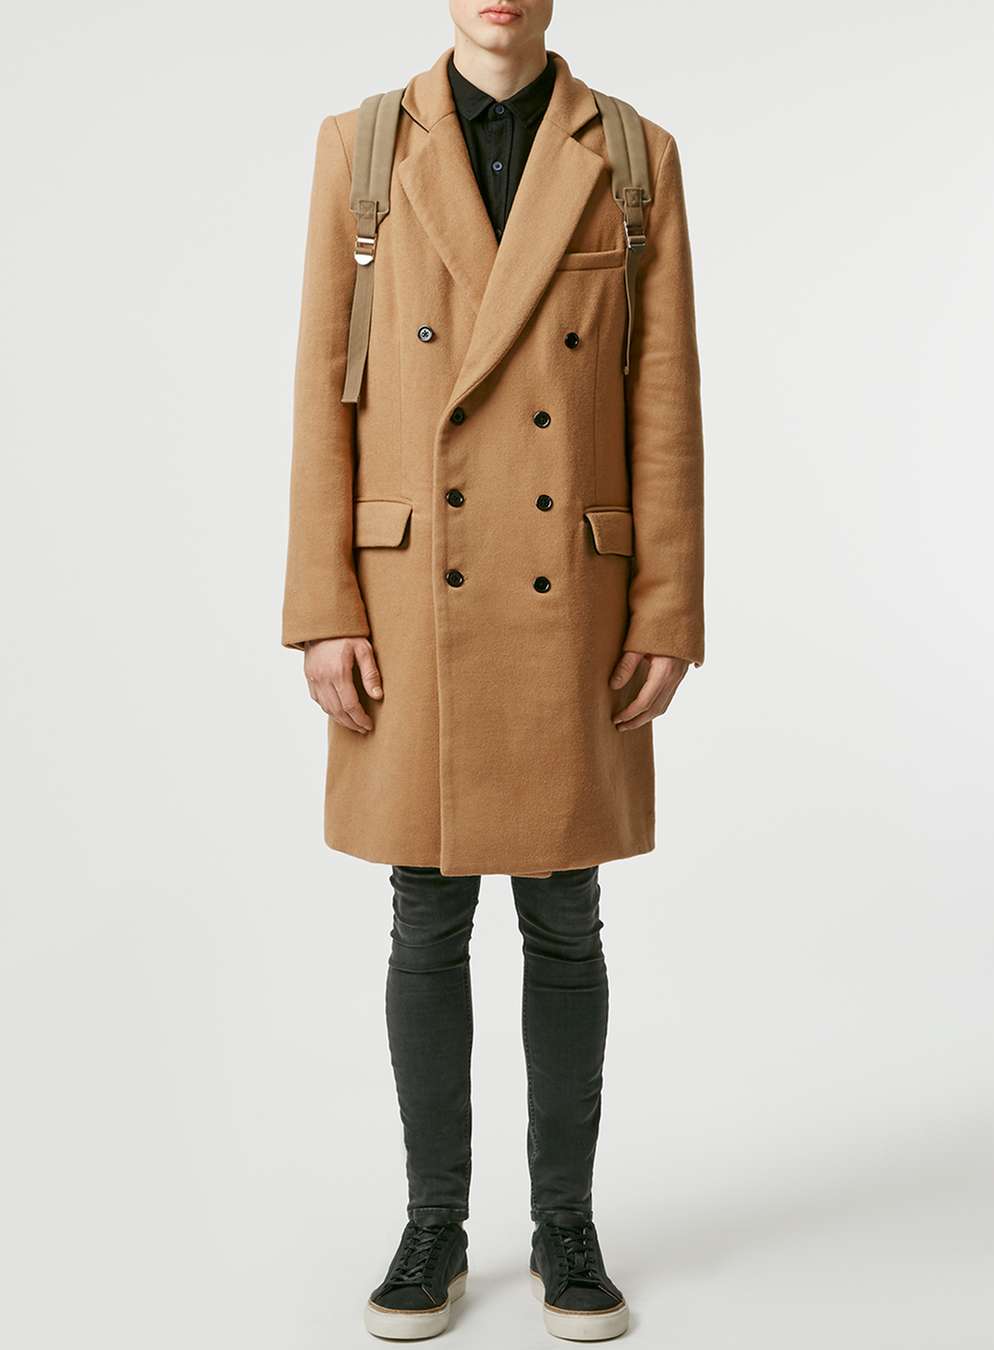 Topman Camel Double-Breasted Coat